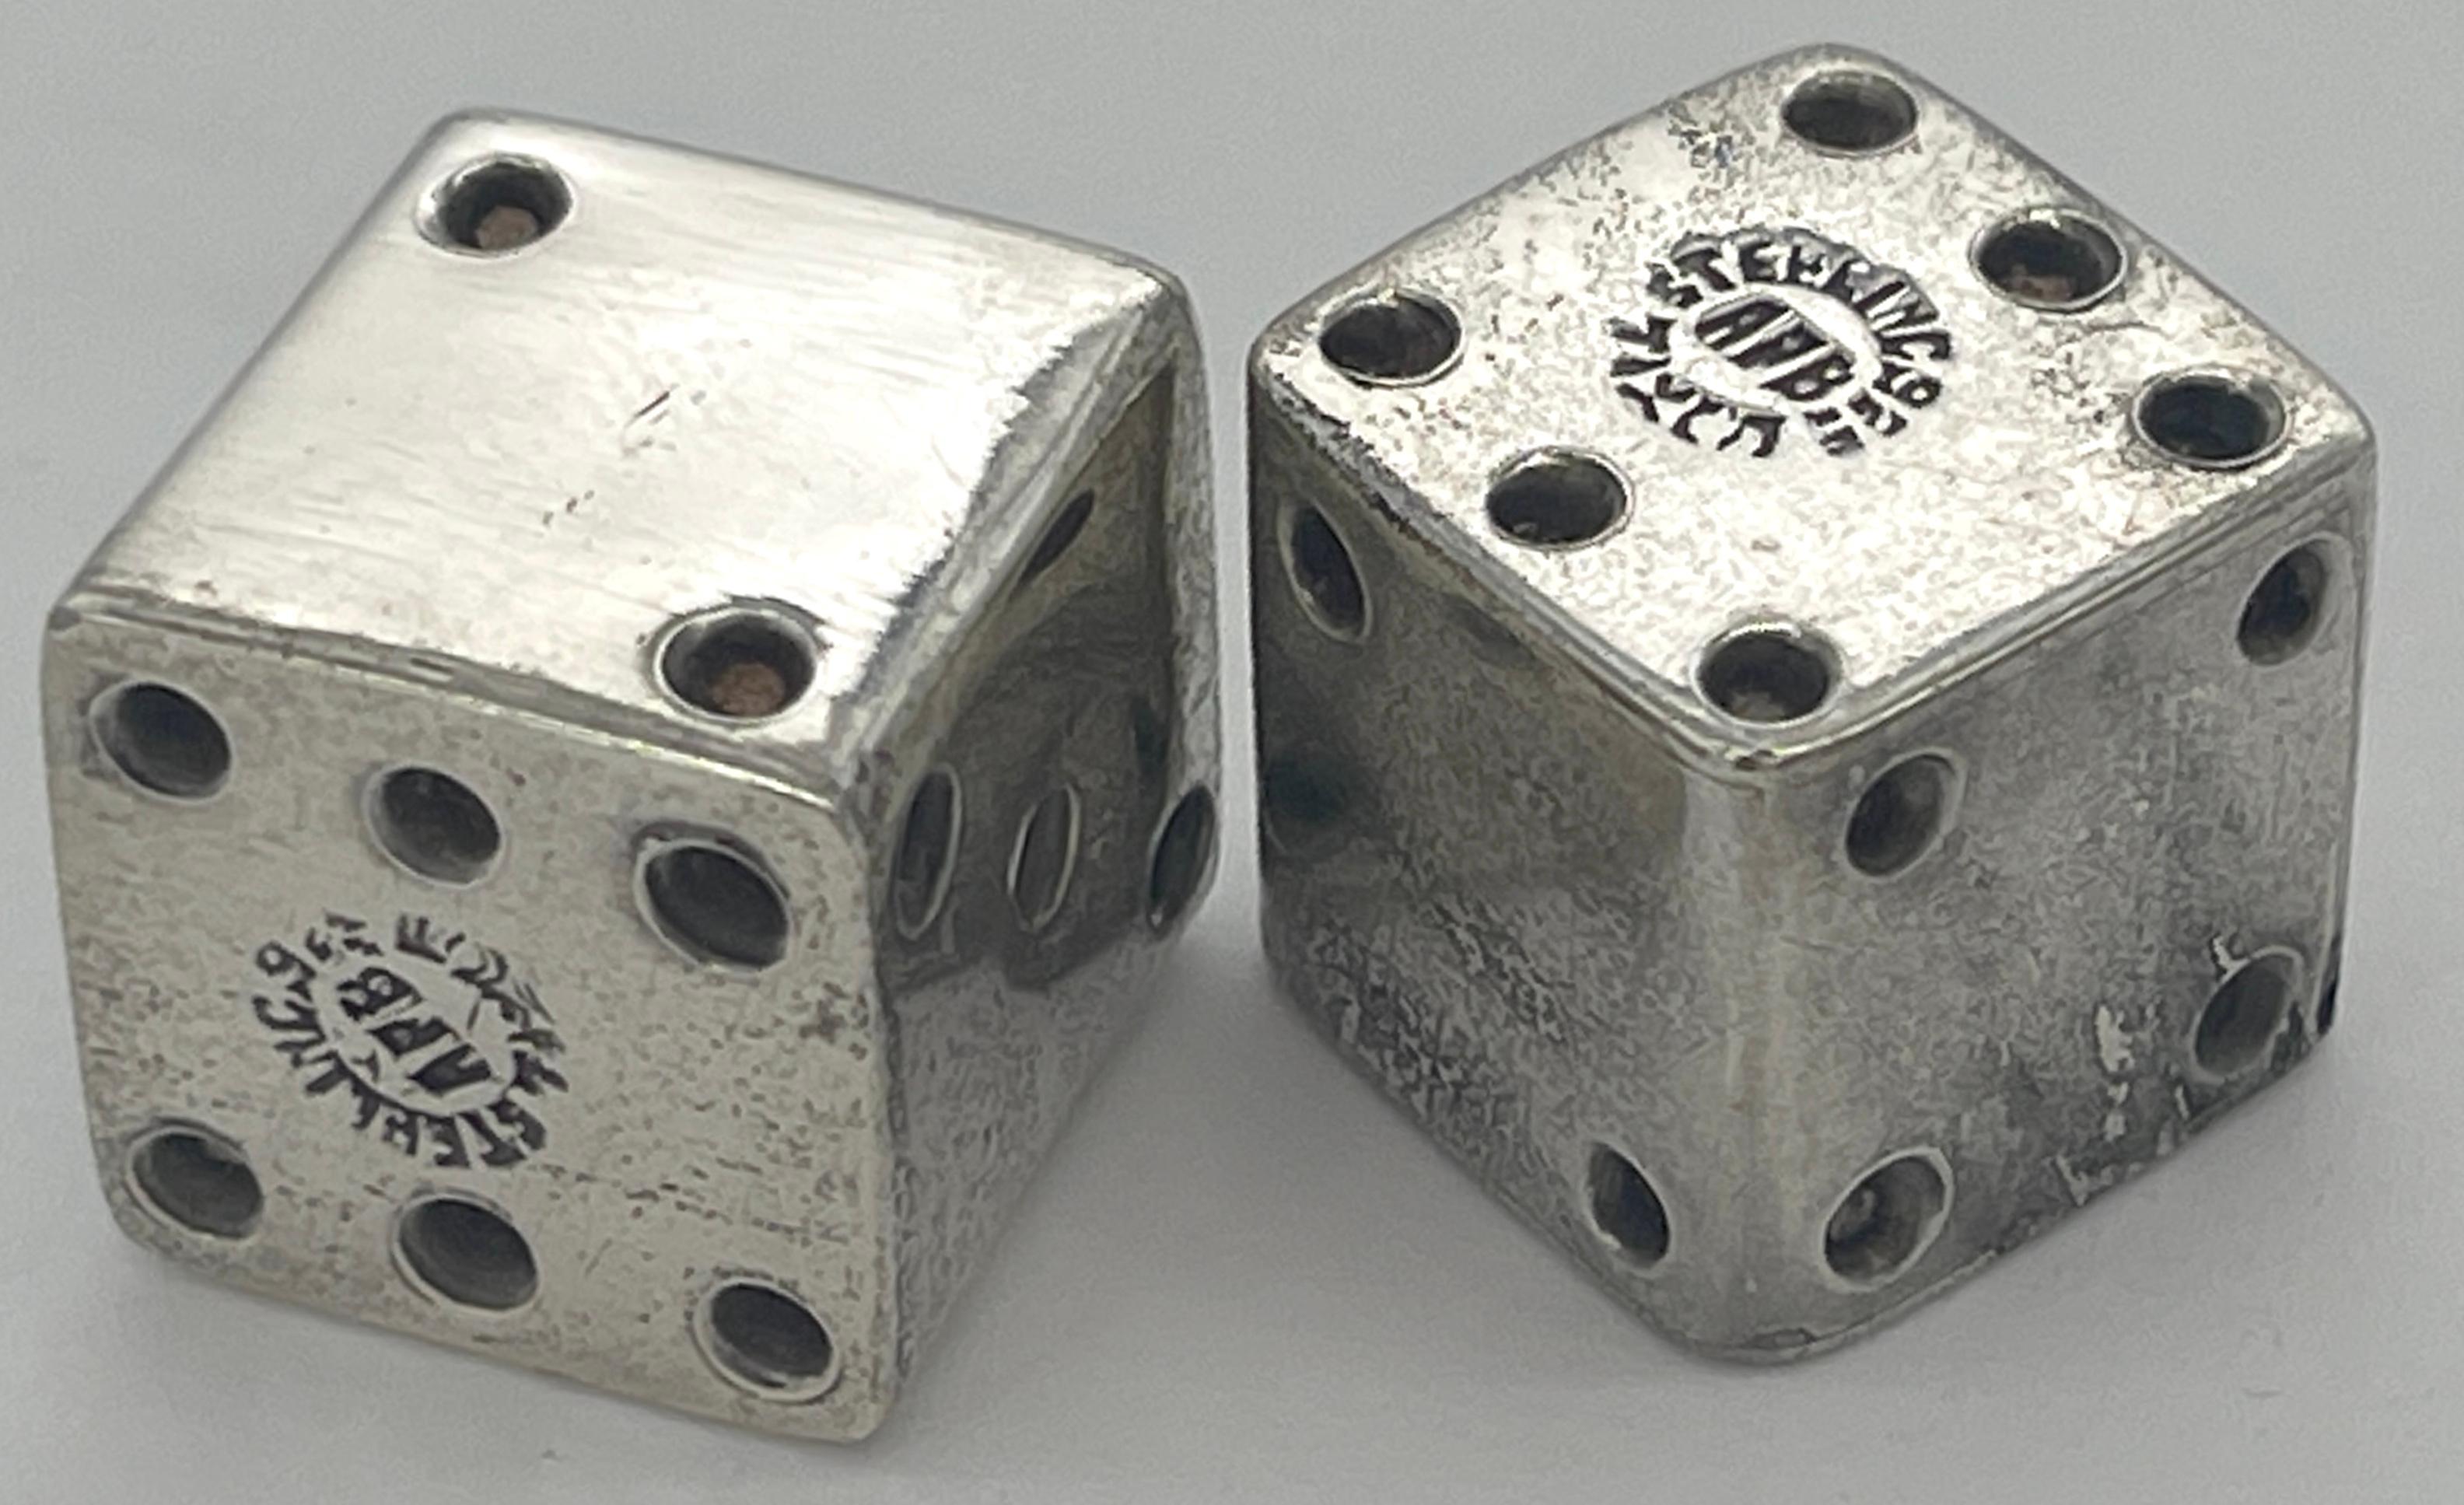 Pair of Taxco School Sterling Silver Dice, Mexico circa 1960s 
Each one is hallmarked with the makers mark, .925 and Taxco.

Elevate your gaming experience with this exquisite pair of Taxco School Sterling Silver Dice, crafted in Mexico circa the